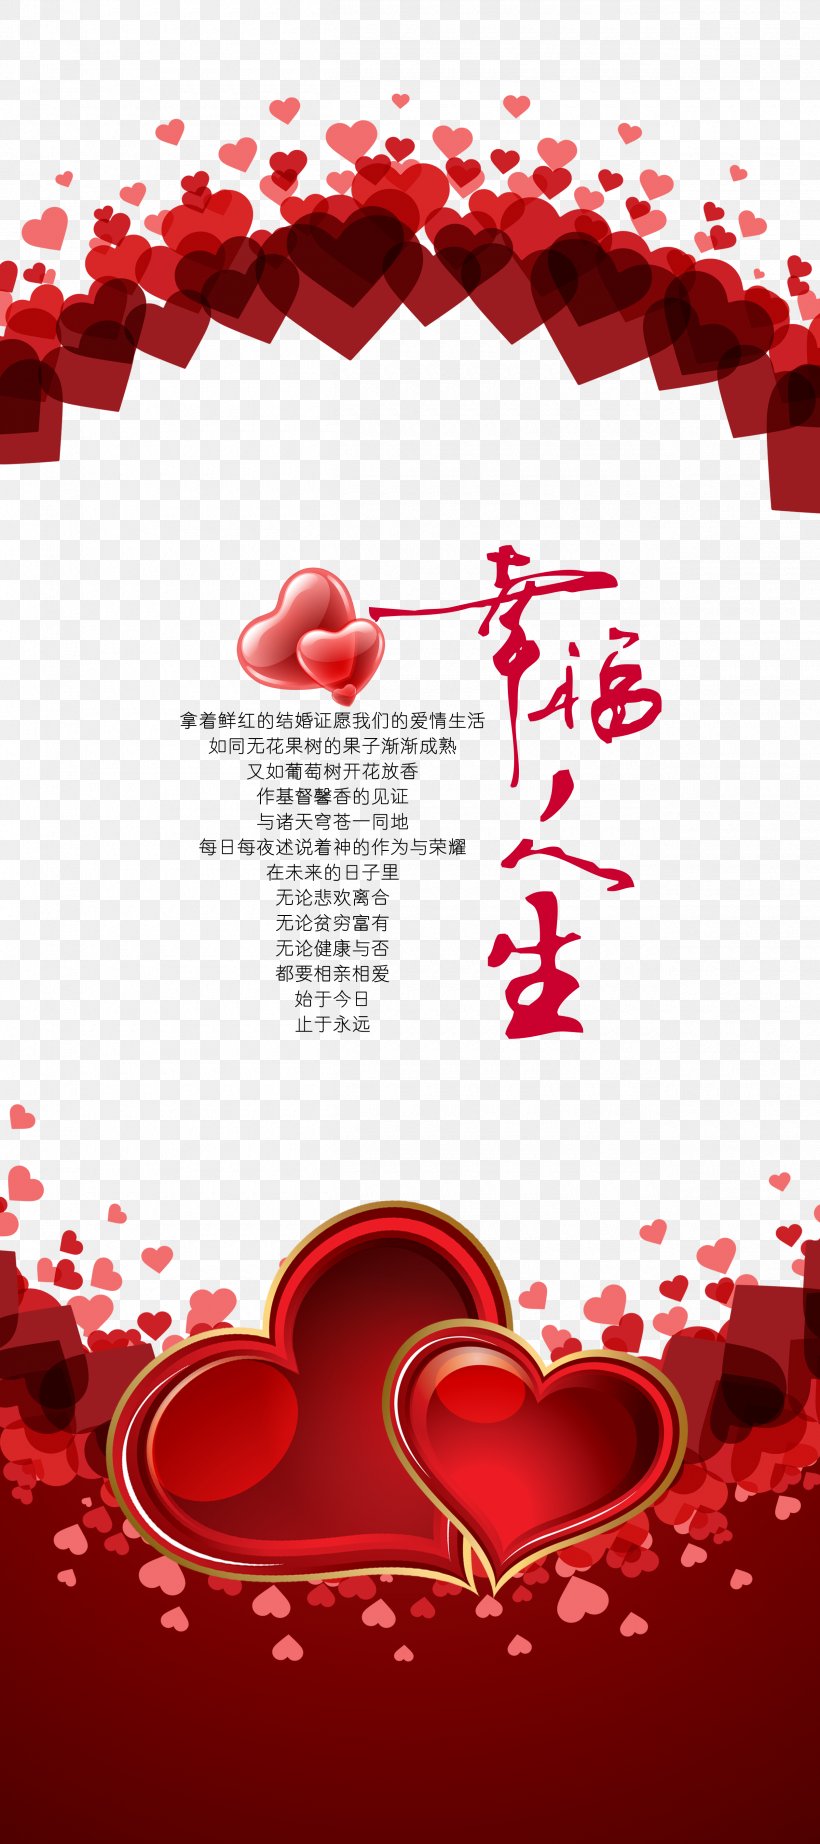 Poster Download, PNG, 2520x5669px, Poster, Heart, Love, Petal, Red Download Free